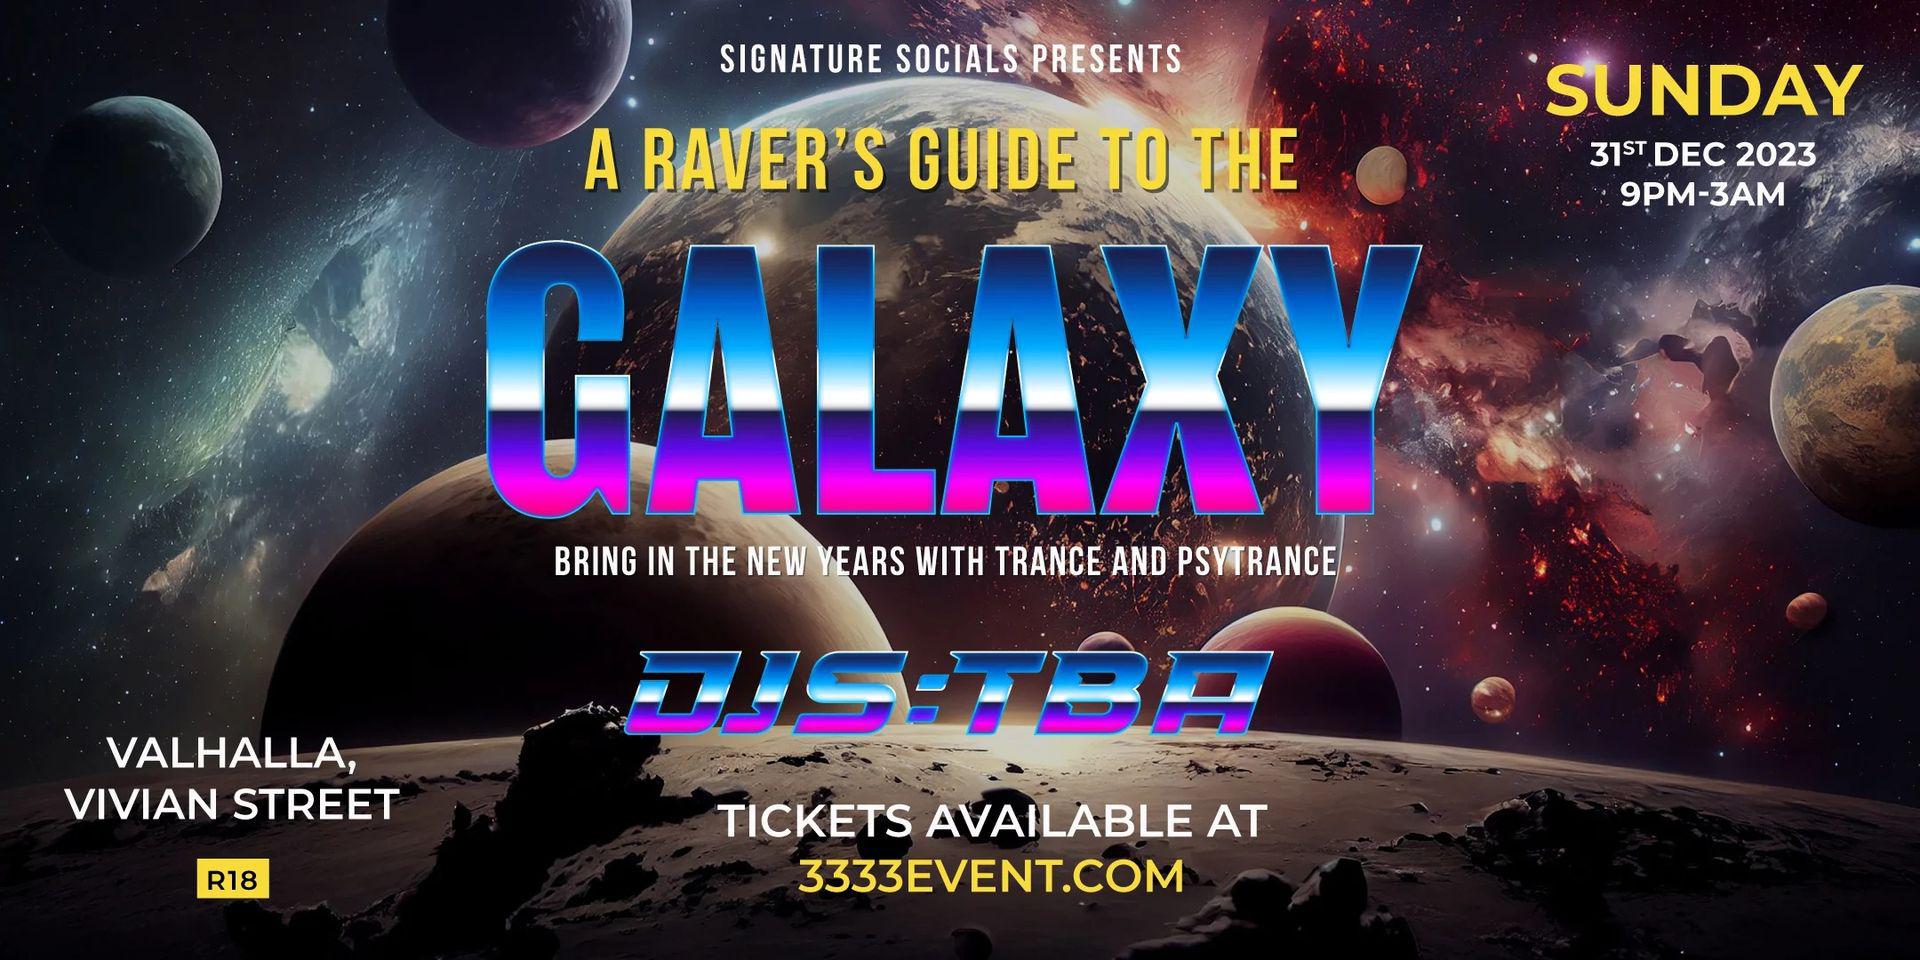 A Ravers Guide To The Galaxy: NYE Party